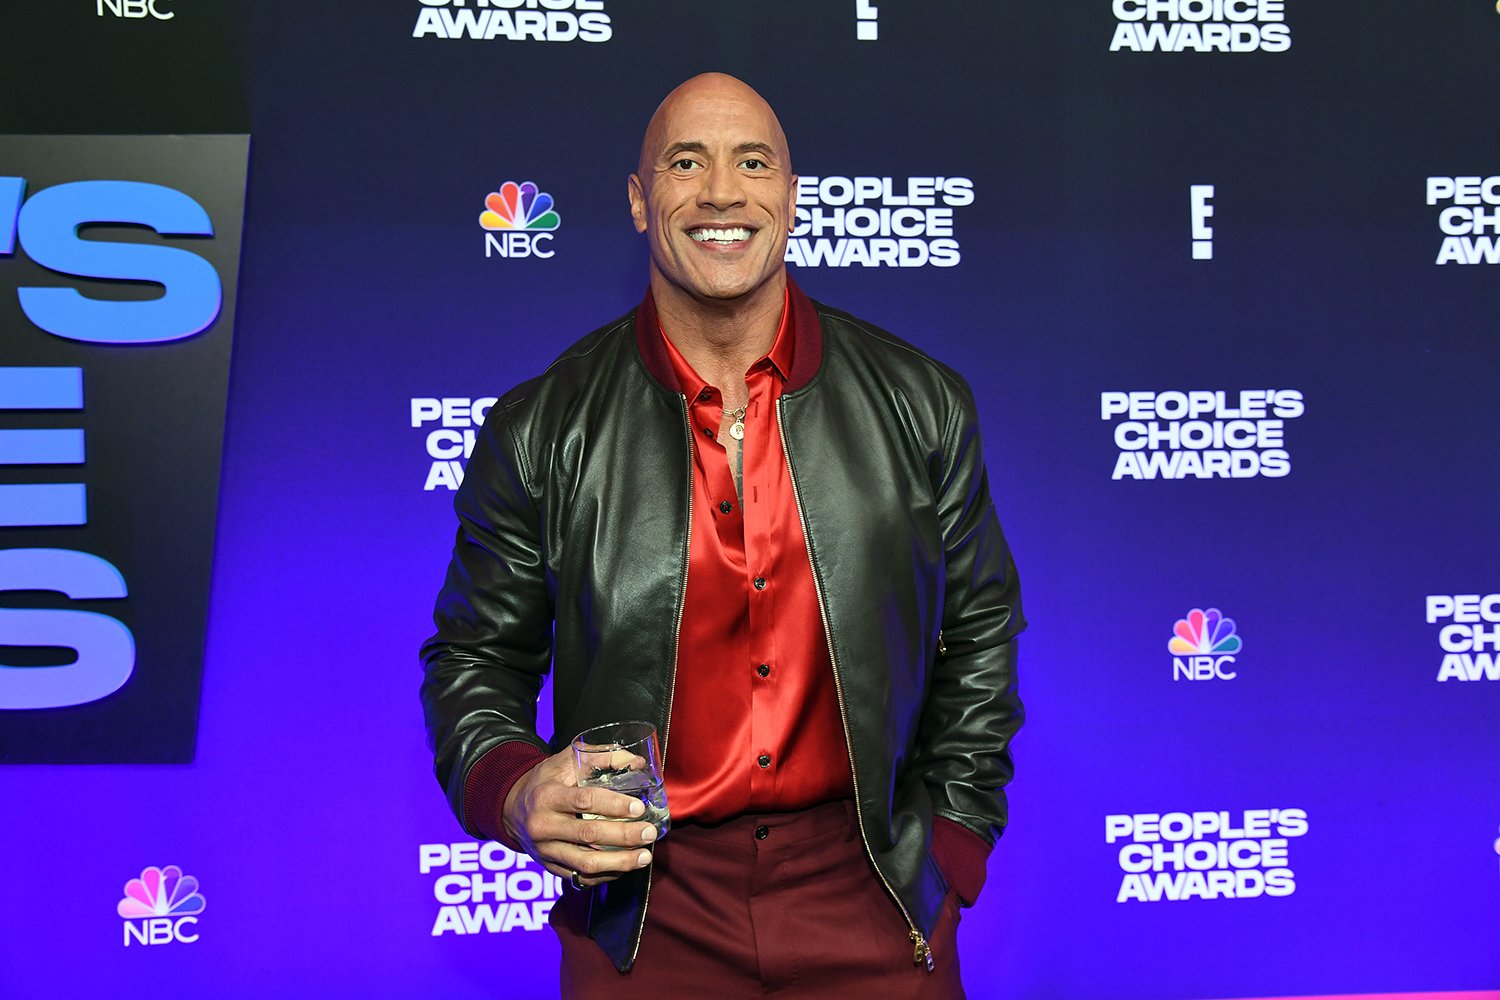 Dwayne Johnson attends the People's Choice Awards 2021